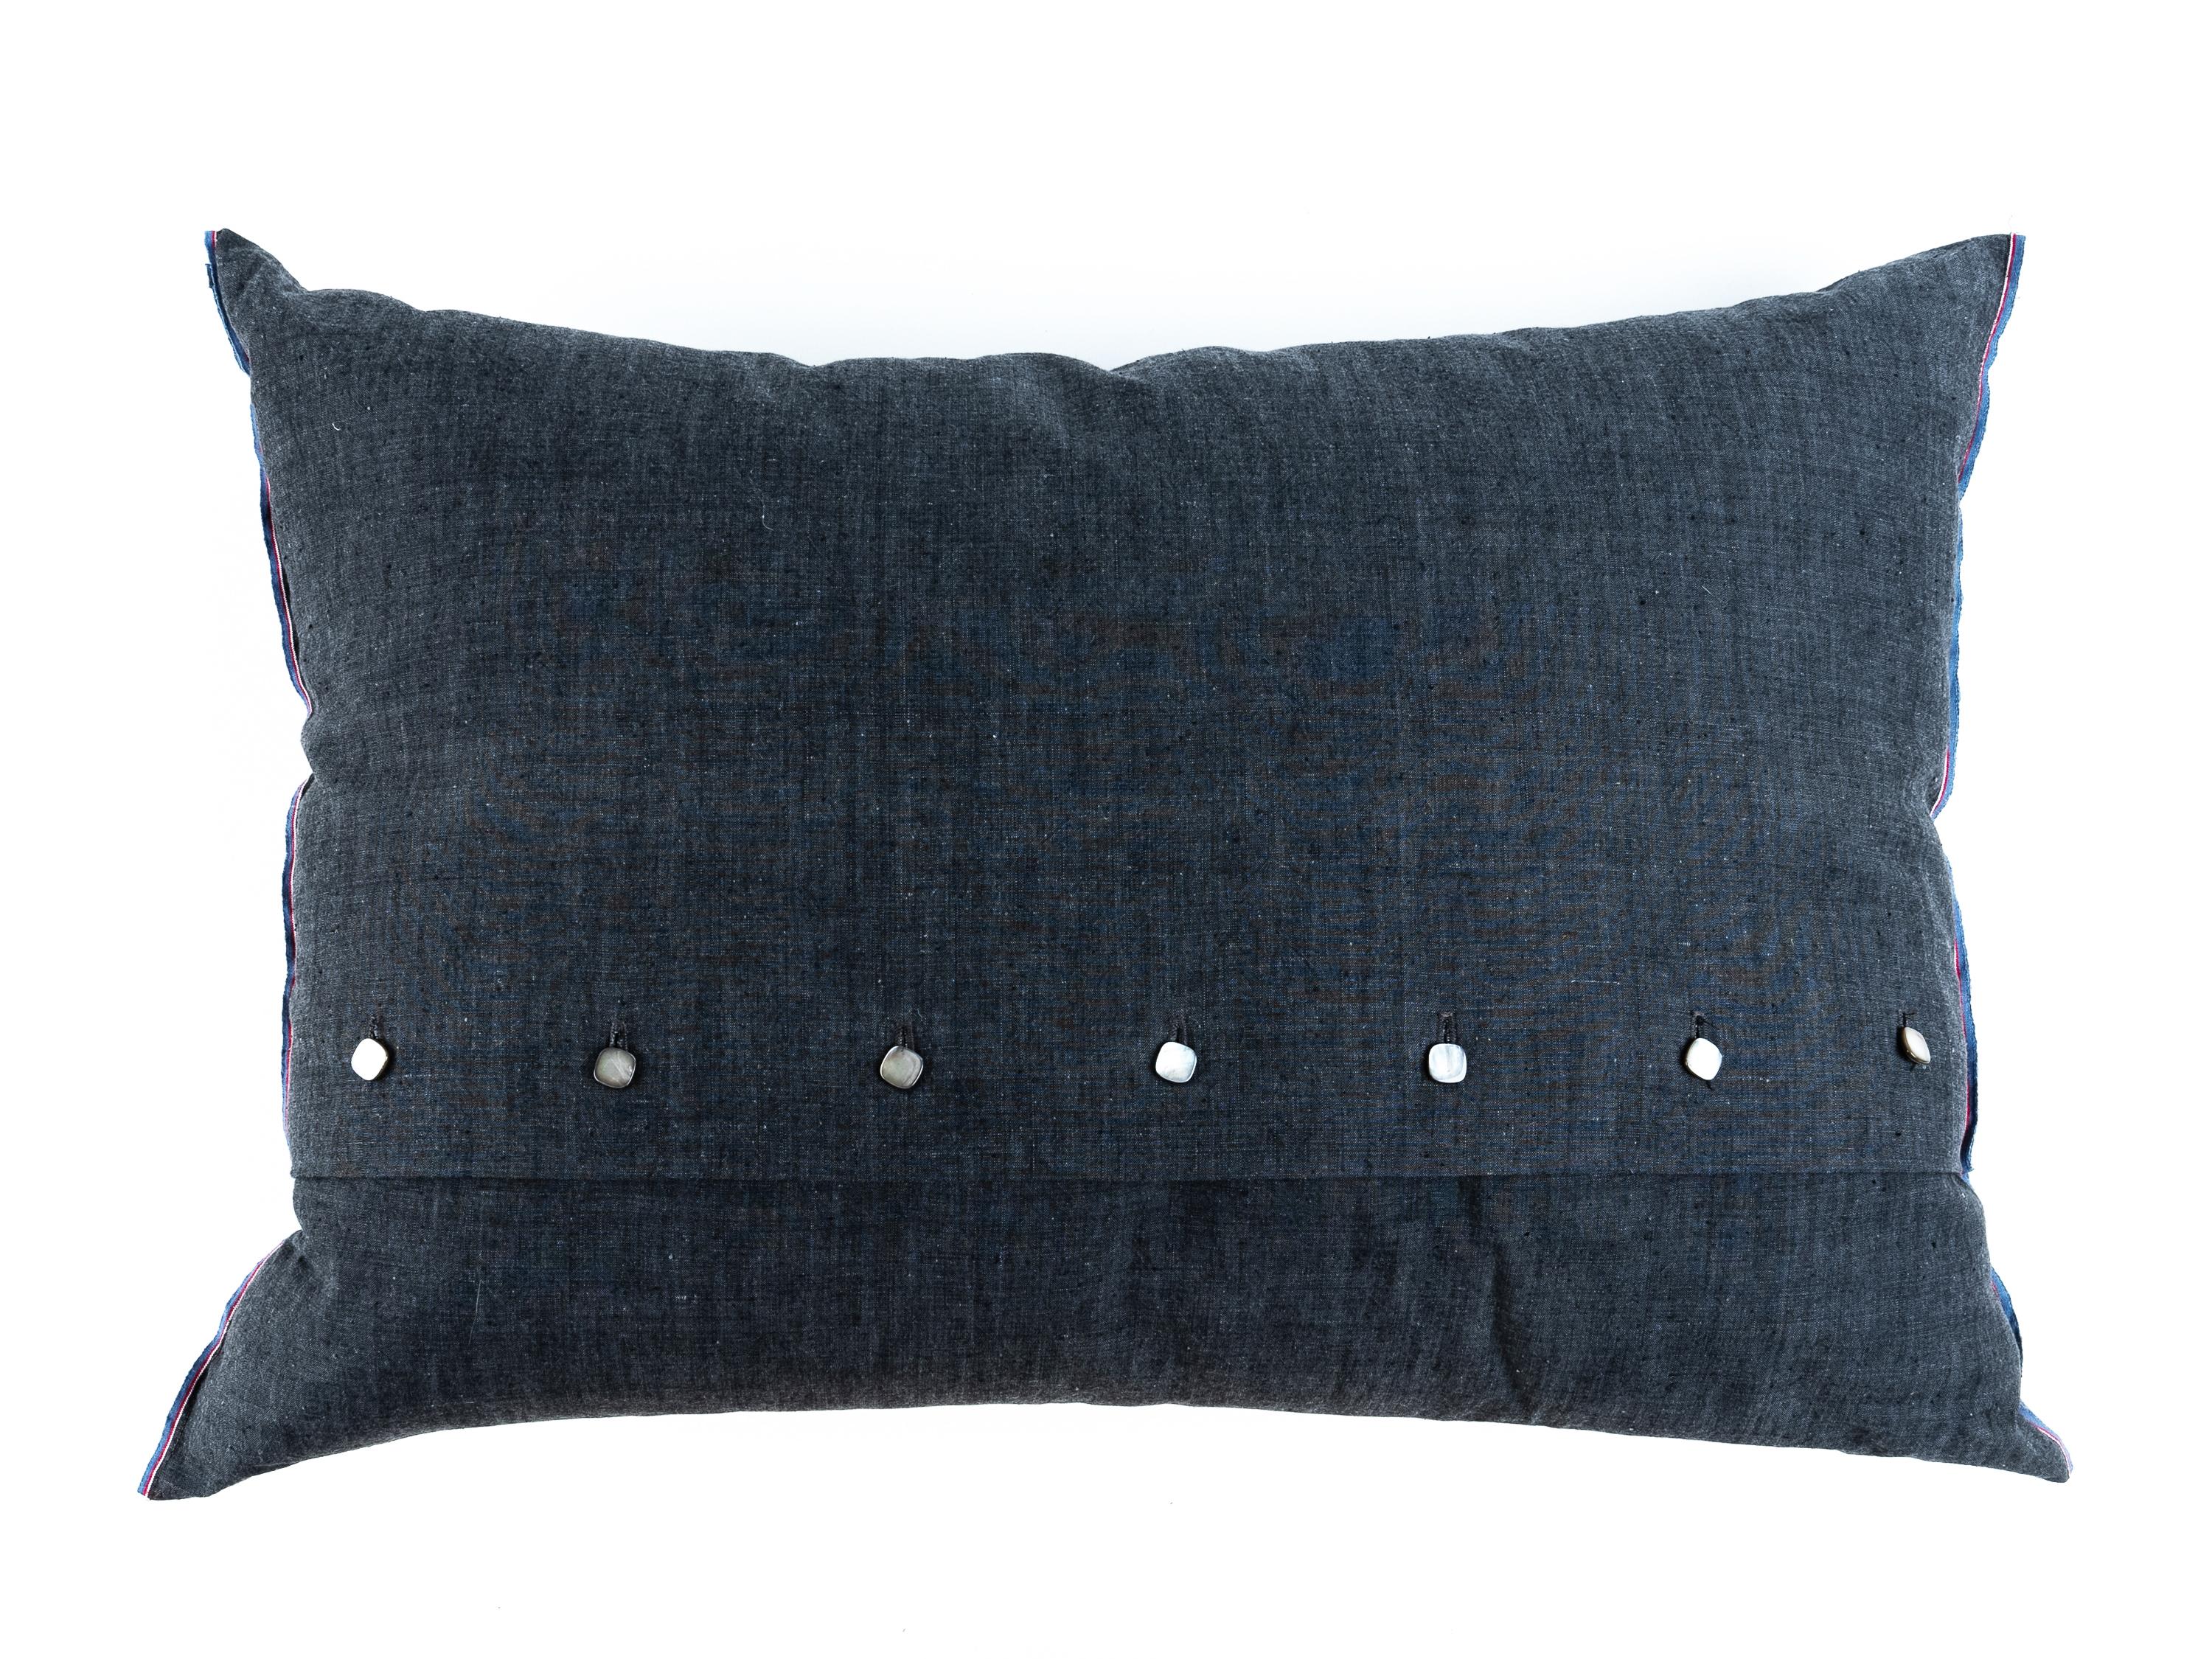 Fabric with history.
Limited edition pair of pillows, made with a fabric called “plancha de algodón” similar to poplin but with more rustic spinning, it is resistant and fresh. Fabric from the well-known company “Textil Mallorquina” original by